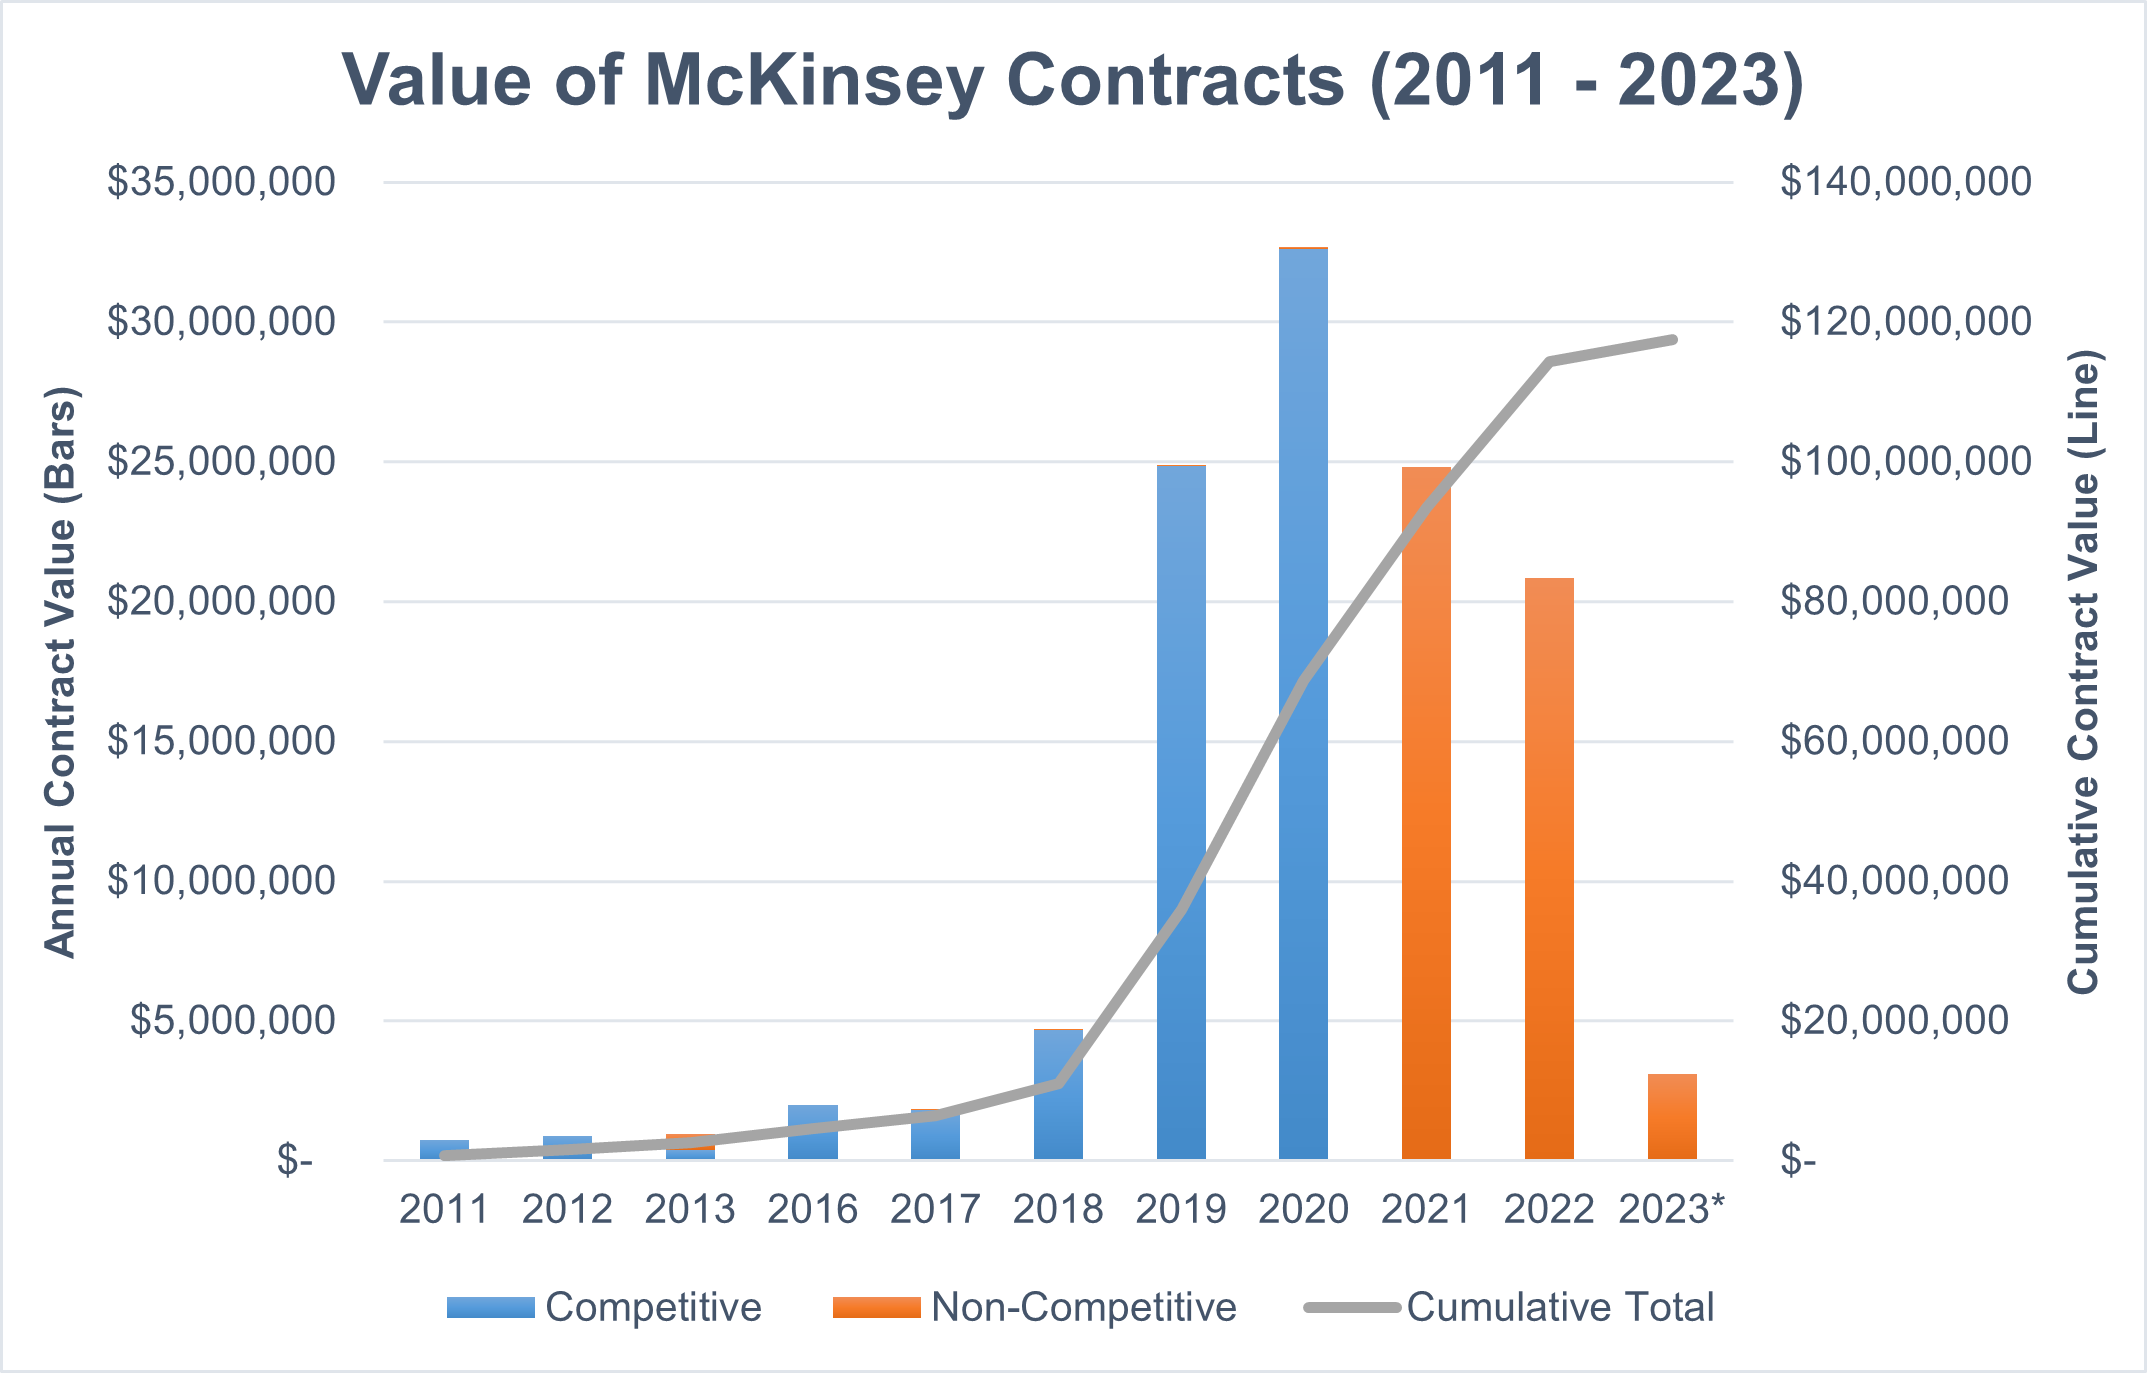 Bar graph displaying the value of McKinsey contracts between 2011 and 2023. Long description below.